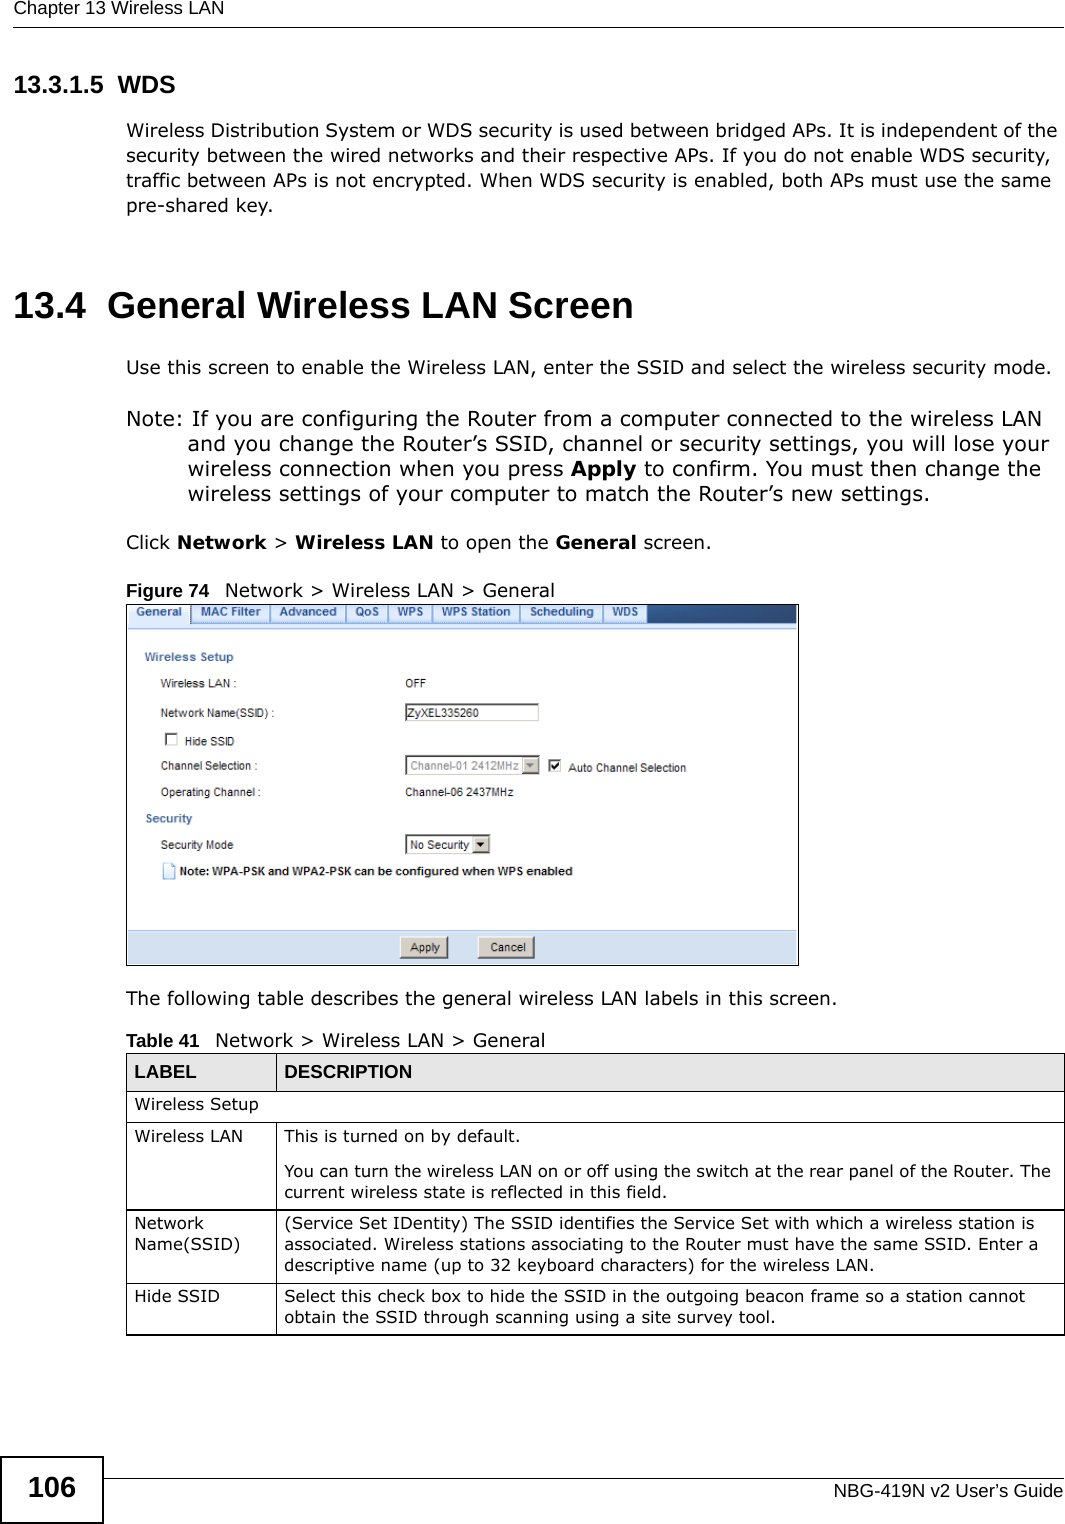 Chapter 13 Wireless LANNBG-419N v2 User’s Guide10613.3.1.5  WDSWireless Distribution System or WDS security is used between bridged APs. It is independent of the security between the wired networks and their respective APs. If you do not enable WDS security, traffic between APs is not encrypted. When WDS security is enabled, both APs must use the same pre-shared key.13.4  General Wireless LAN Screen Use this screen to enable the Wireless LAN, enter the SSID and select the wireless security mode.Note: If you are configuring the Router from a computer connected to the wireless LAN and you change the Router’s SSID, channel or security settings, you will lose your wireless connection when you press Apply to confirm. You must then change the wireless settings of your computer to match the Router’s new settings.Click Network &gt; Wireless LAN to open the General screen.Figure 74   Network &gt; Wireless LAN &gt; General The following table describes the general wireless LAN labels in this screen.Table 41   Network &gt; Wireless LAN &gt; GeneralLABEL DESCRIPTIONWireless SetupWireless LAN This is turned on by default. You can turn the wireless LAN on or off using the switch at the rear panel of the Router. The current wireless state is reflected in this field.Network Name(SSID)(Service Set IDentity) The SSID identifies the Service Set with which a wireless station is associated. Wireless stations associating to the Router must have the same SSID. Enter a descriptive name (up to 32 keyboard characters) for the wireless LAN. Hide SSID Select this check box to hide the SSID in the outgoing beacon frame so a station cannot obtain the SSID through scanning using a site survey tool.